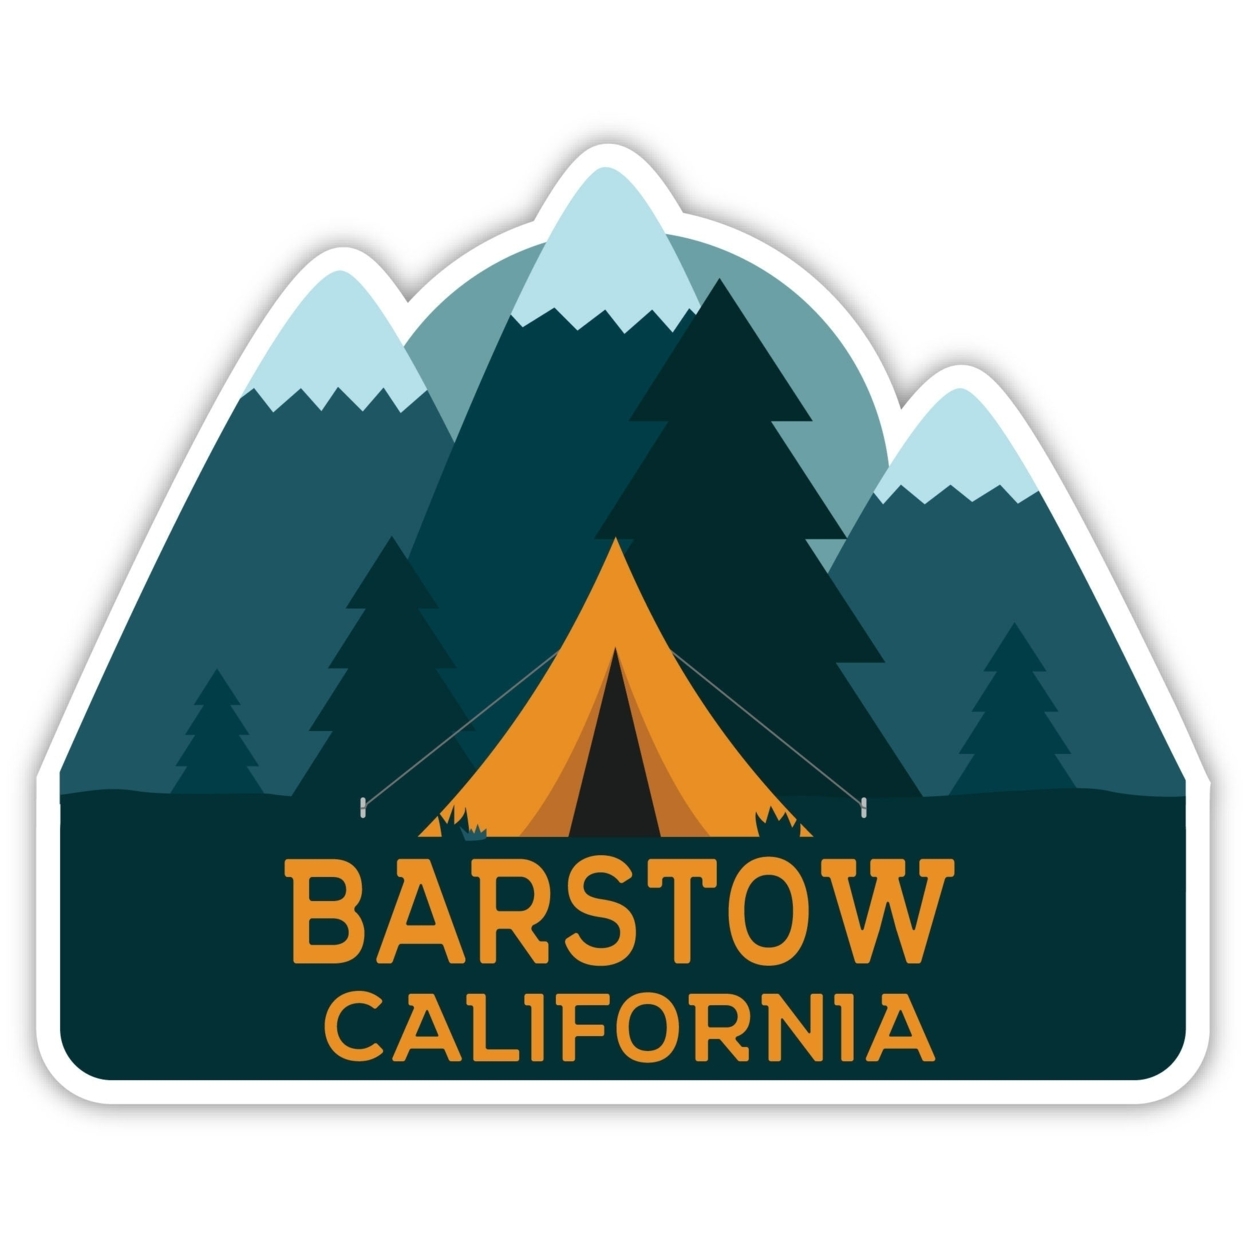 Barstow California Souvenir Decorative Stickers (Choose Theme And Size) - Single Unit, 4-Inch, Tent